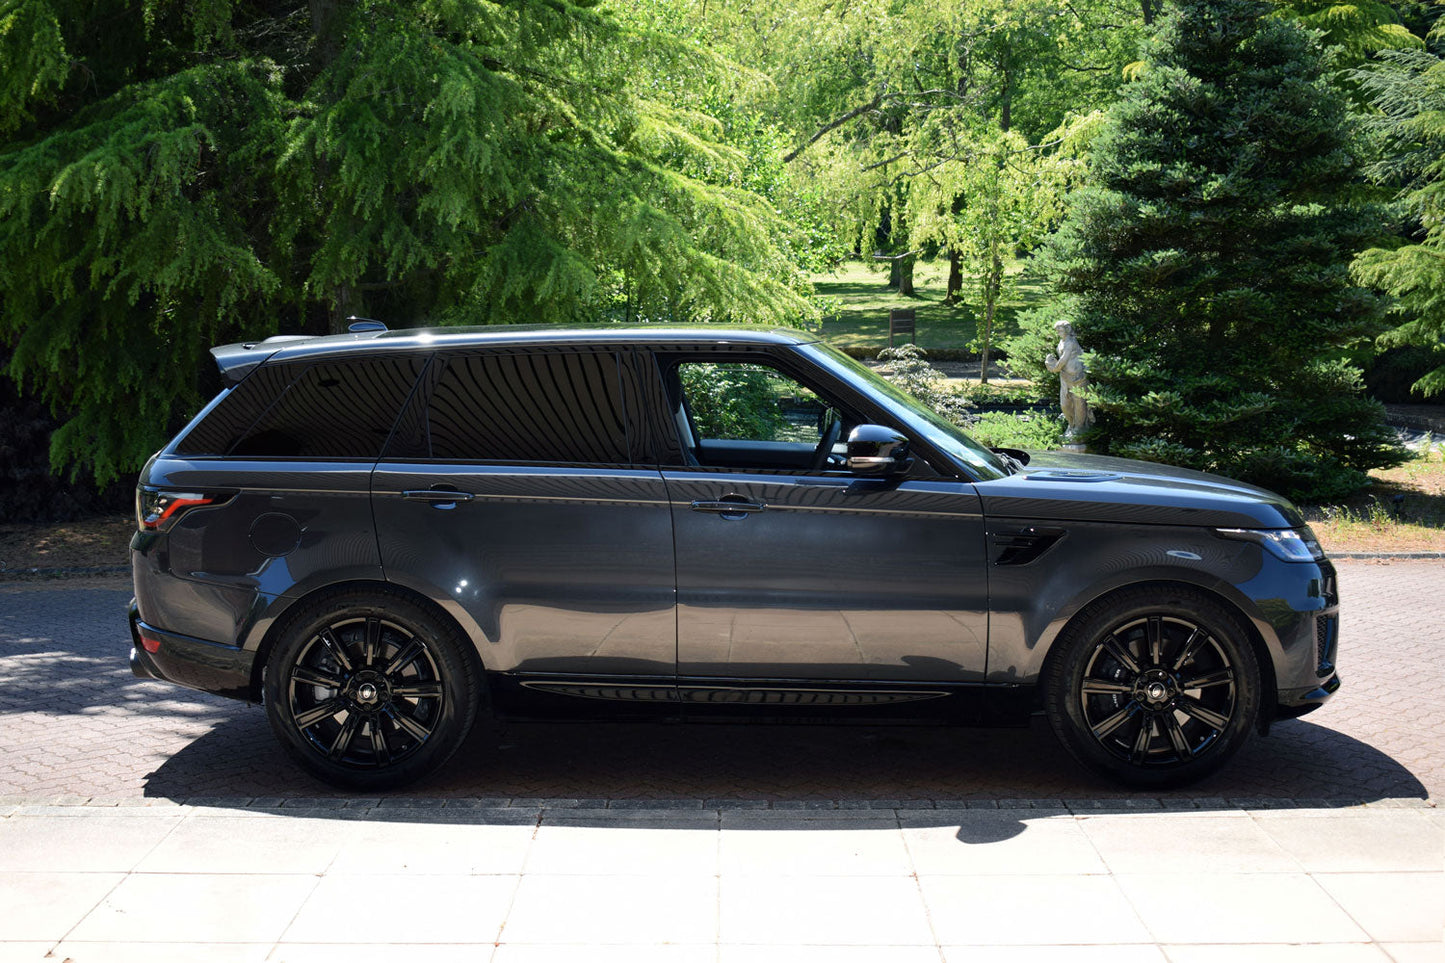 Range Rover Sport 3.0 V6 SuperCharged - Sport System with Sound Architect™ (2018-20) - QuickSilver Exhausts